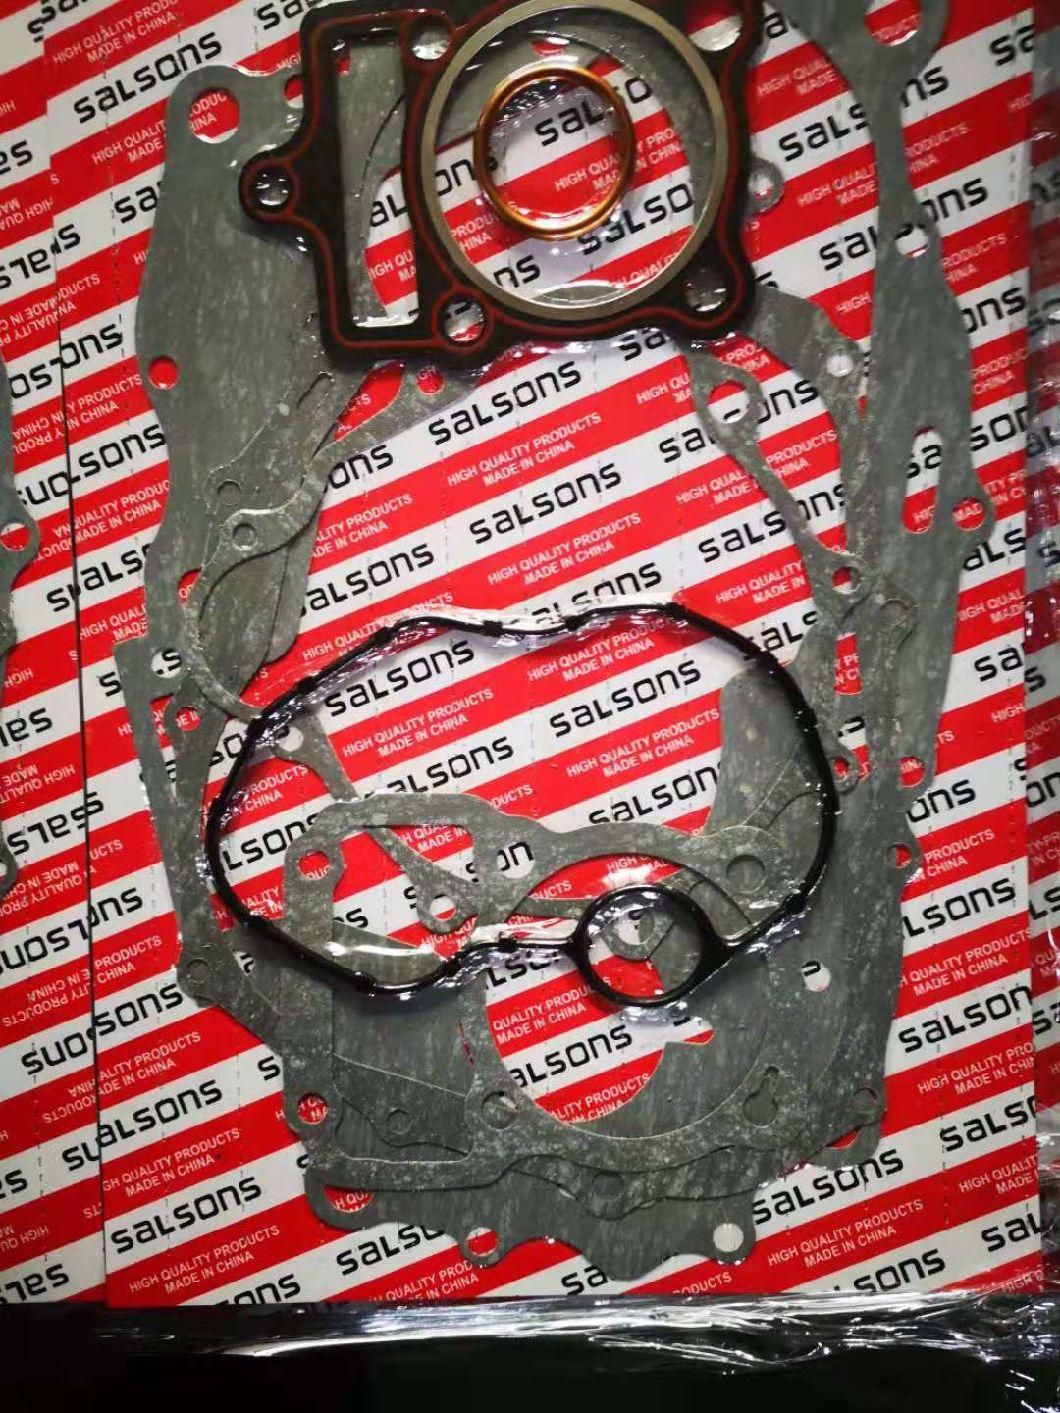 Wholesale Motorcycle Parts Complete Engine Gaskets Set for Sale